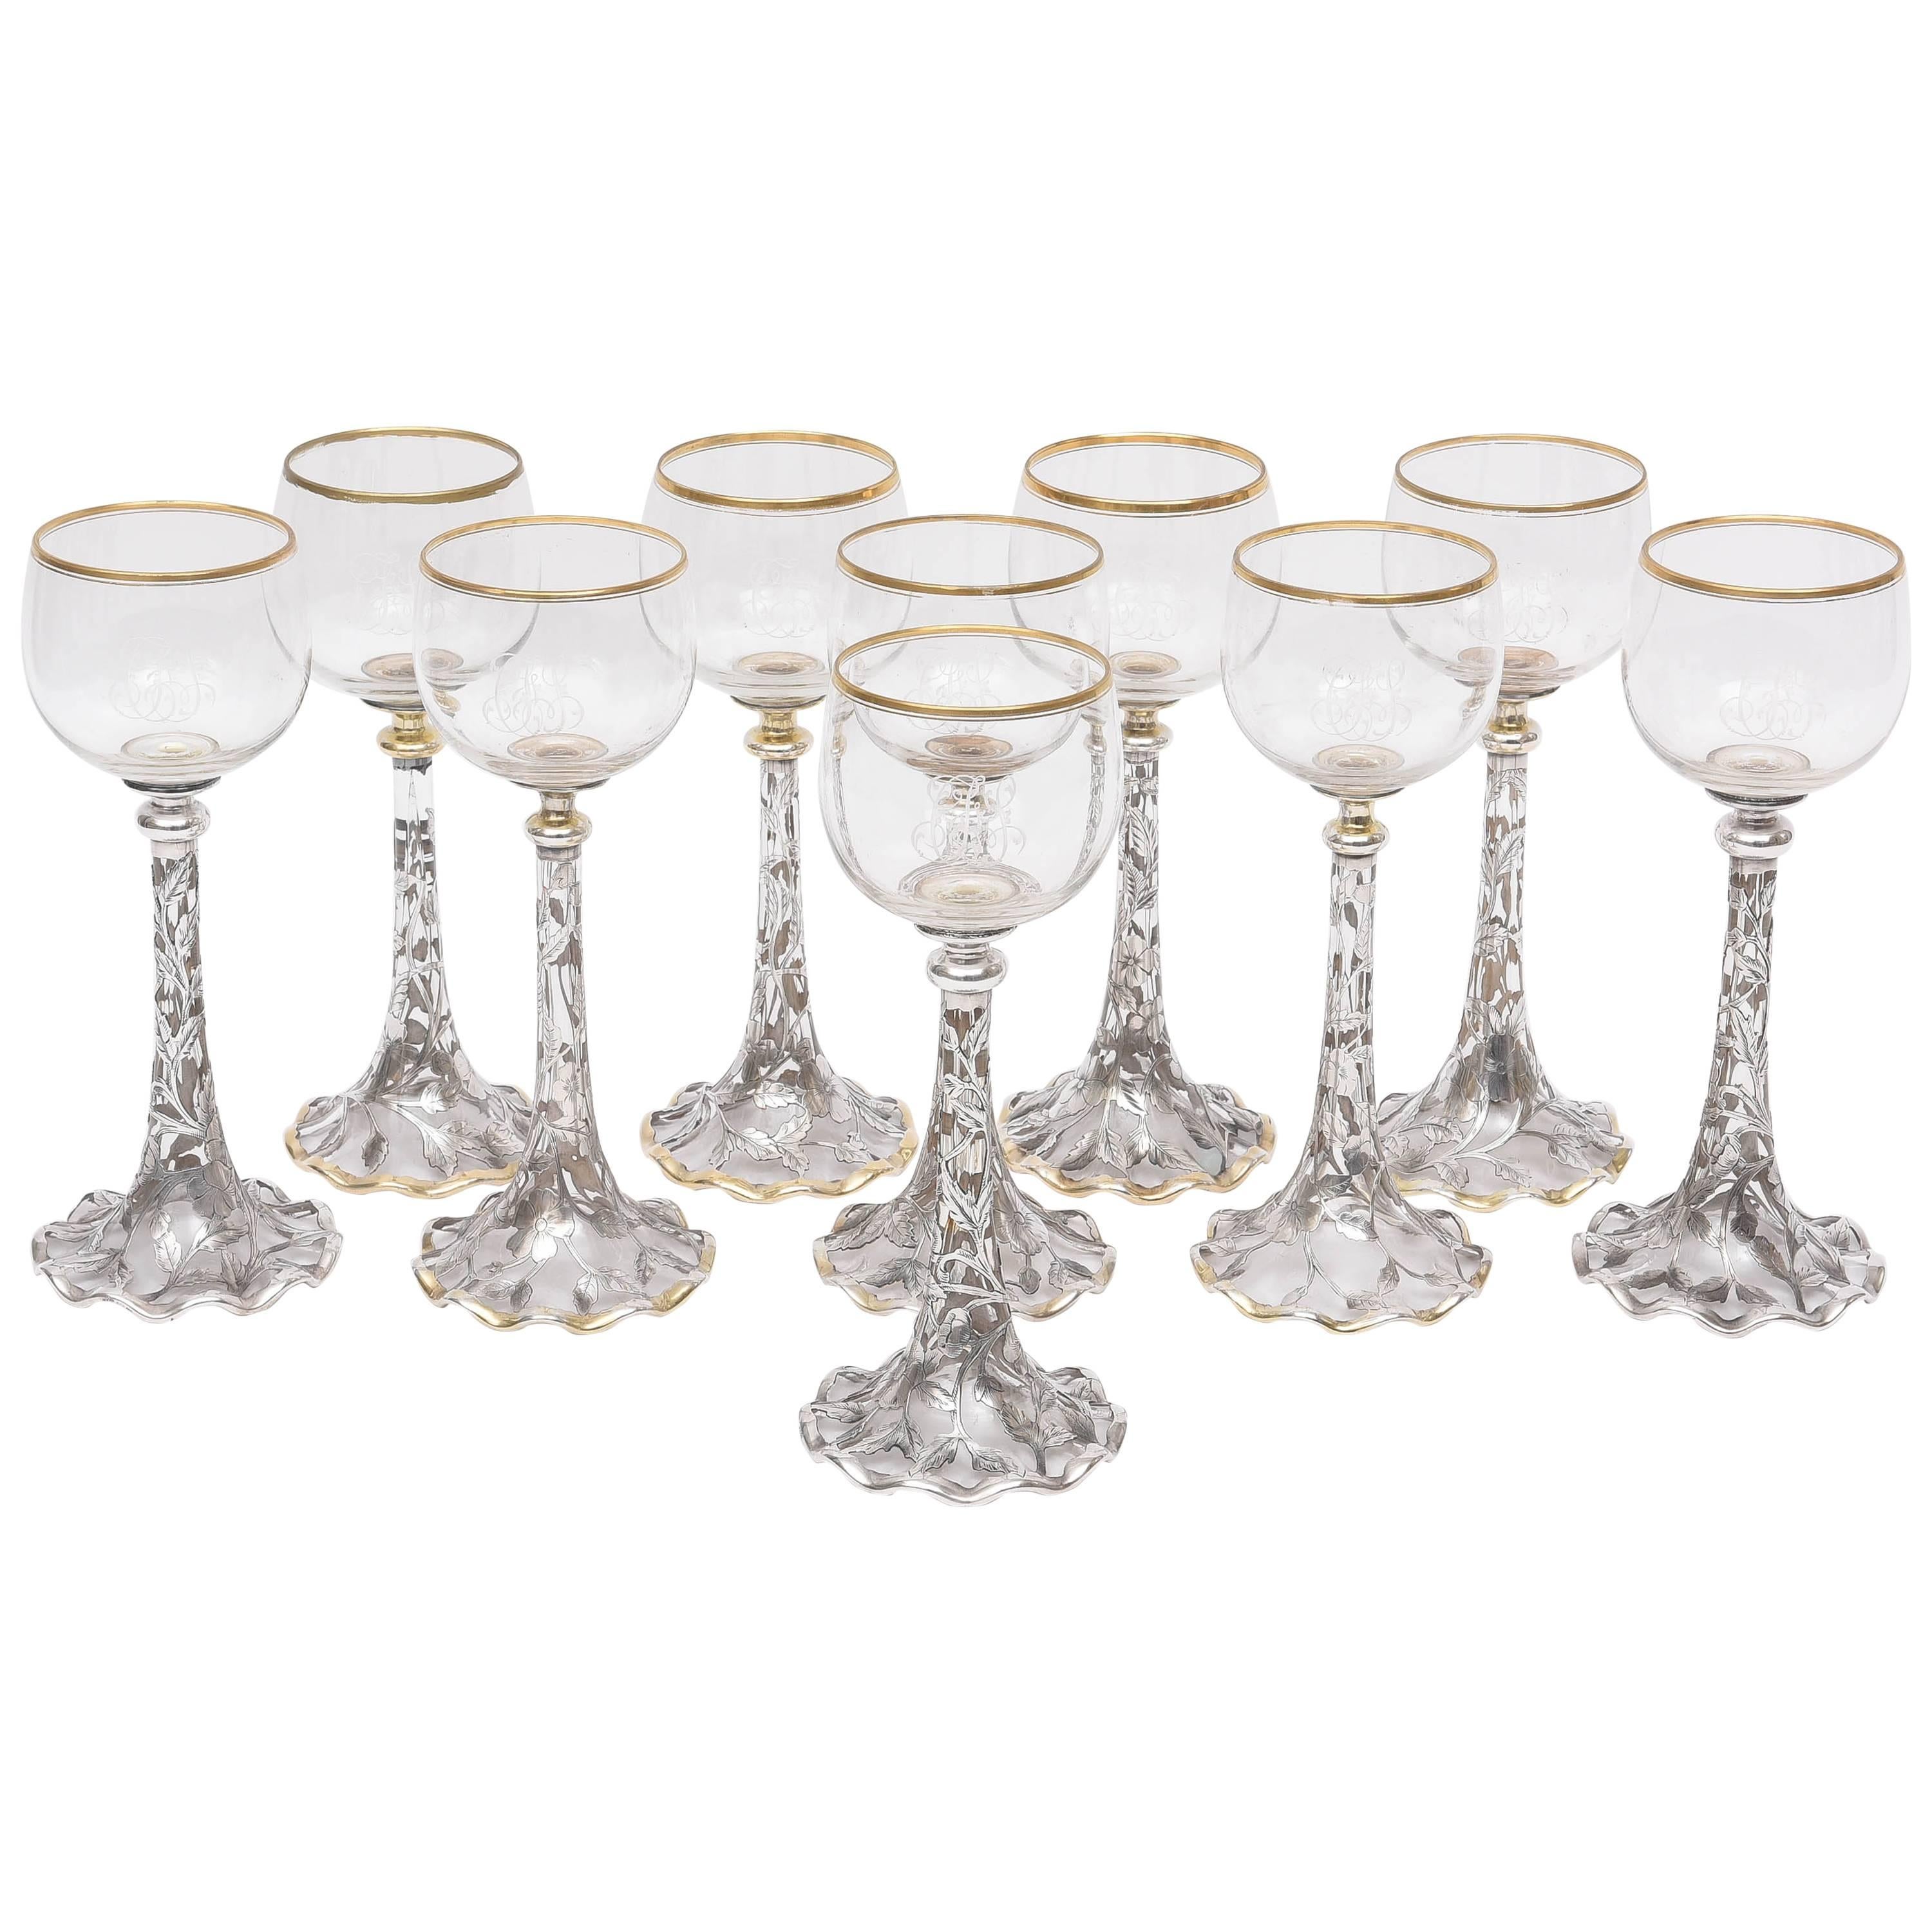 10 Exquisite Sterling Overlay and Crystal Goblets, Gorham